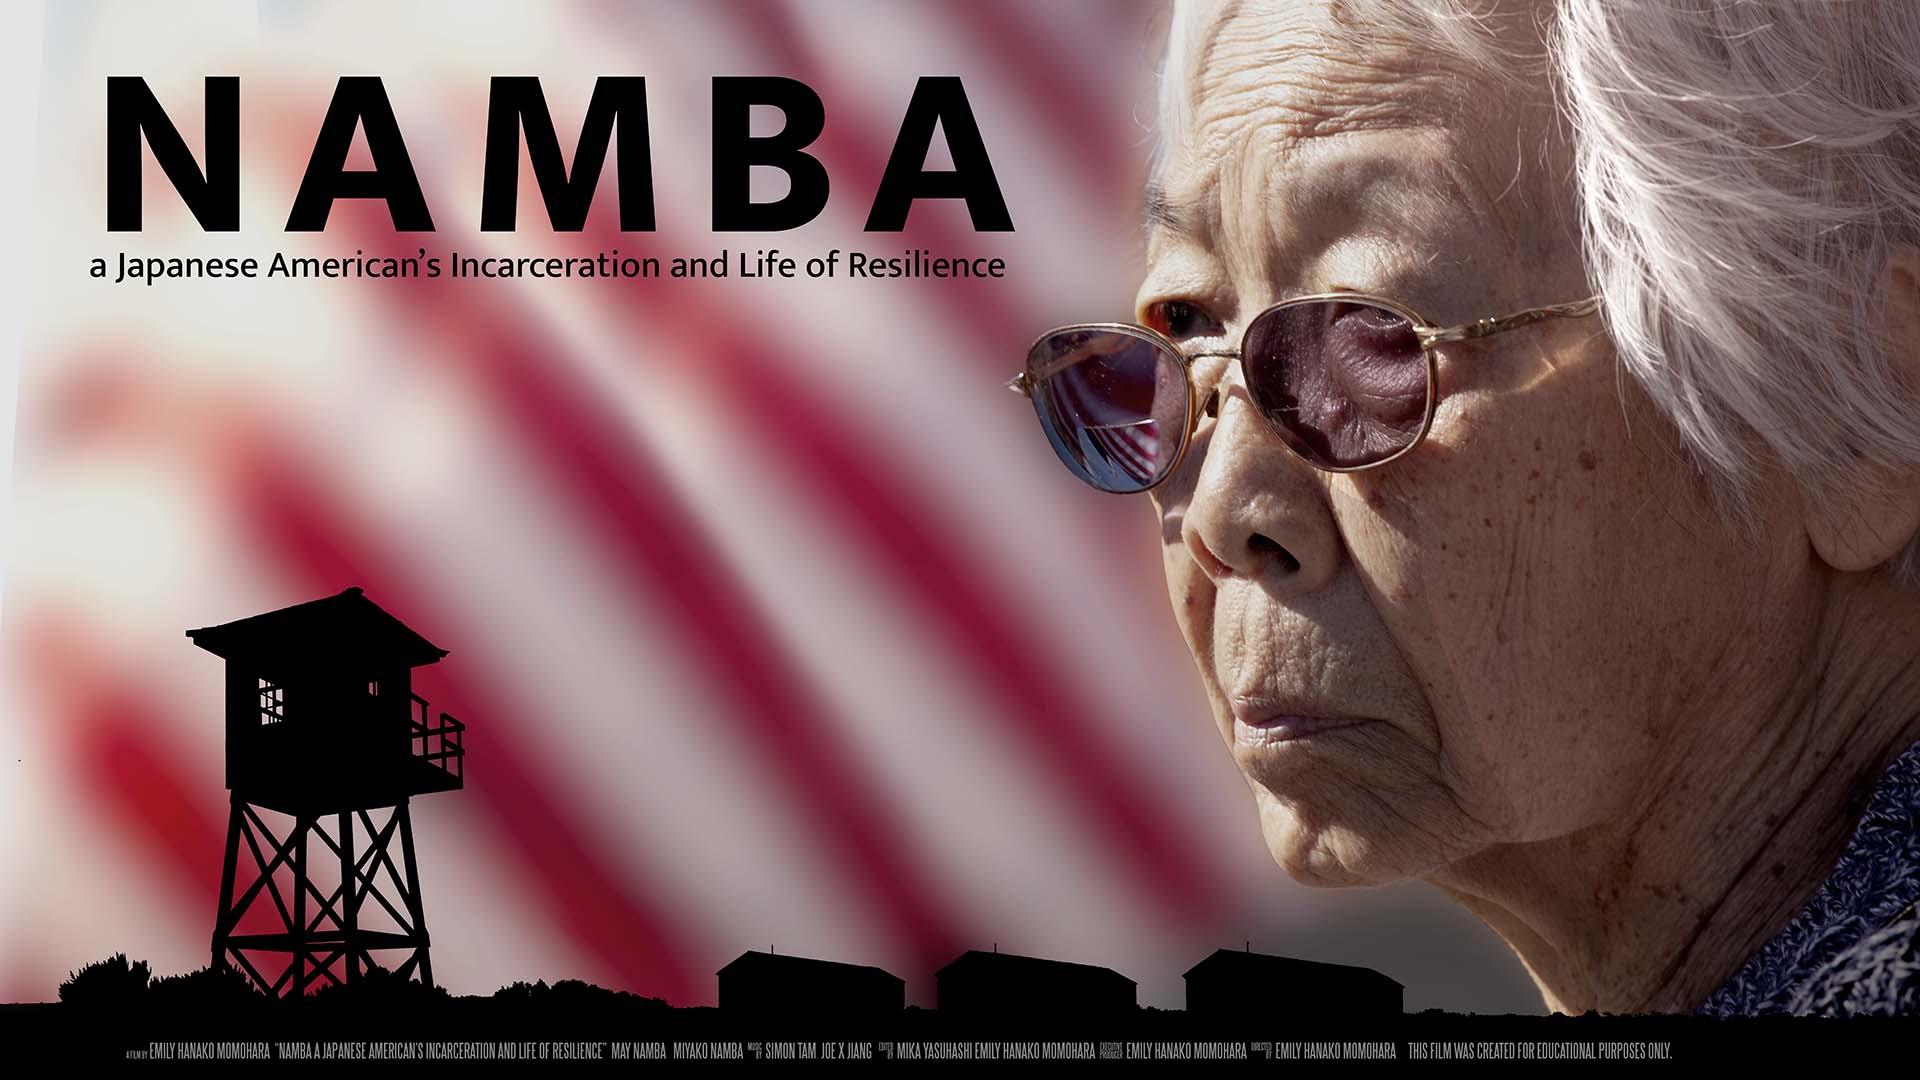 NAMBA: A Japanese American's Incarceration and Life of Resilience